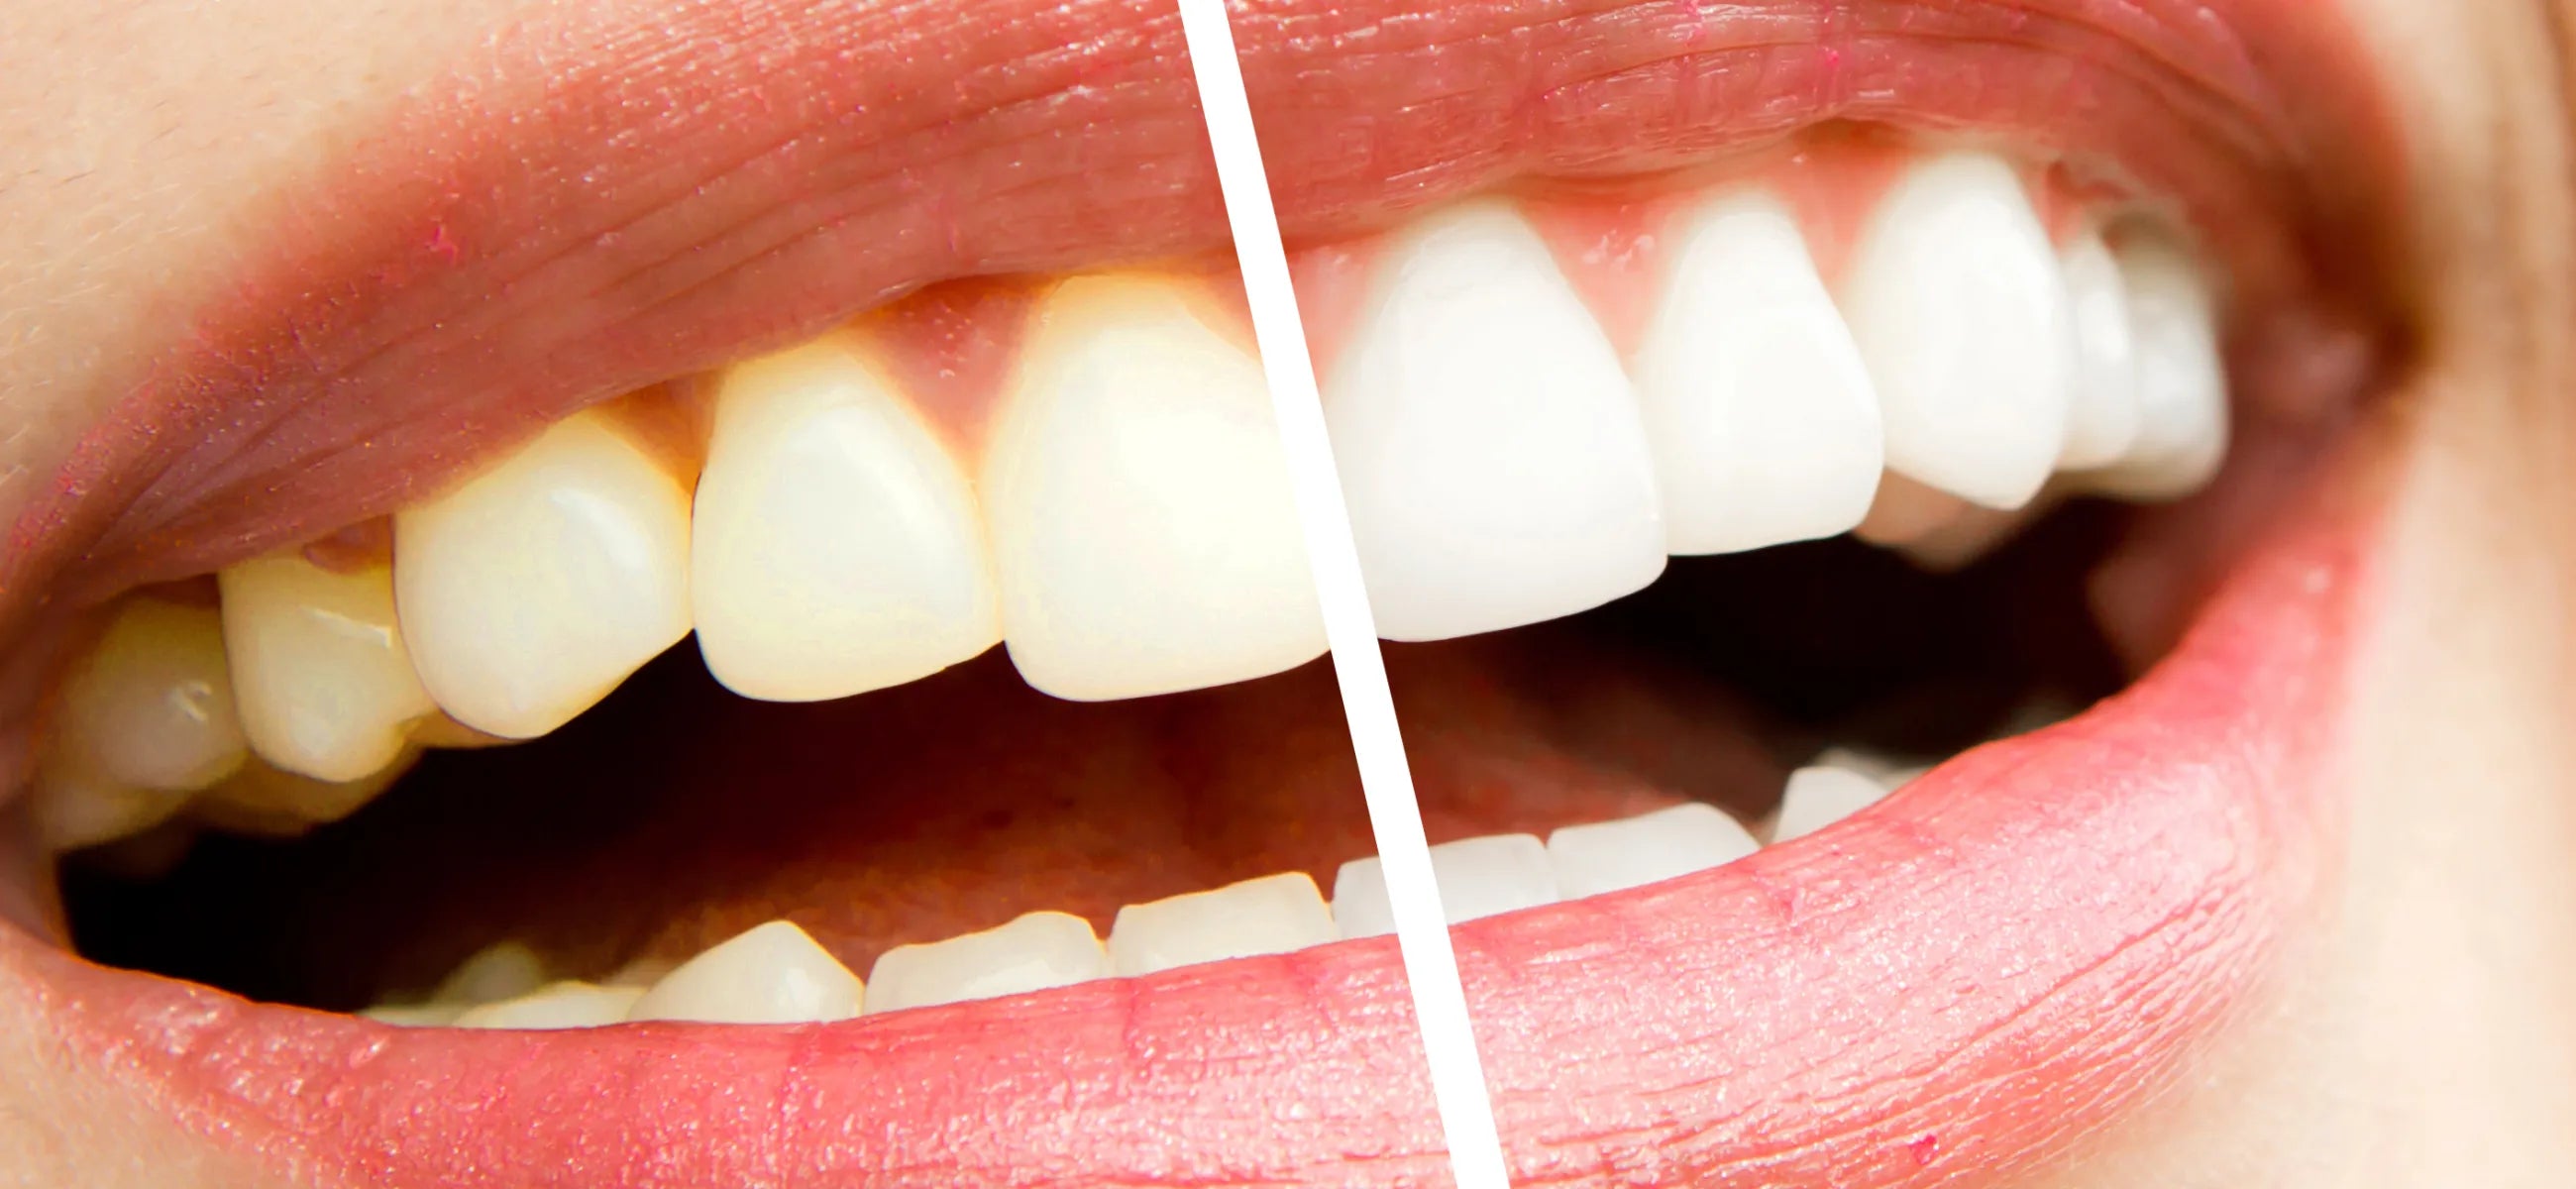 Whitening strips before and after: Do they really work?